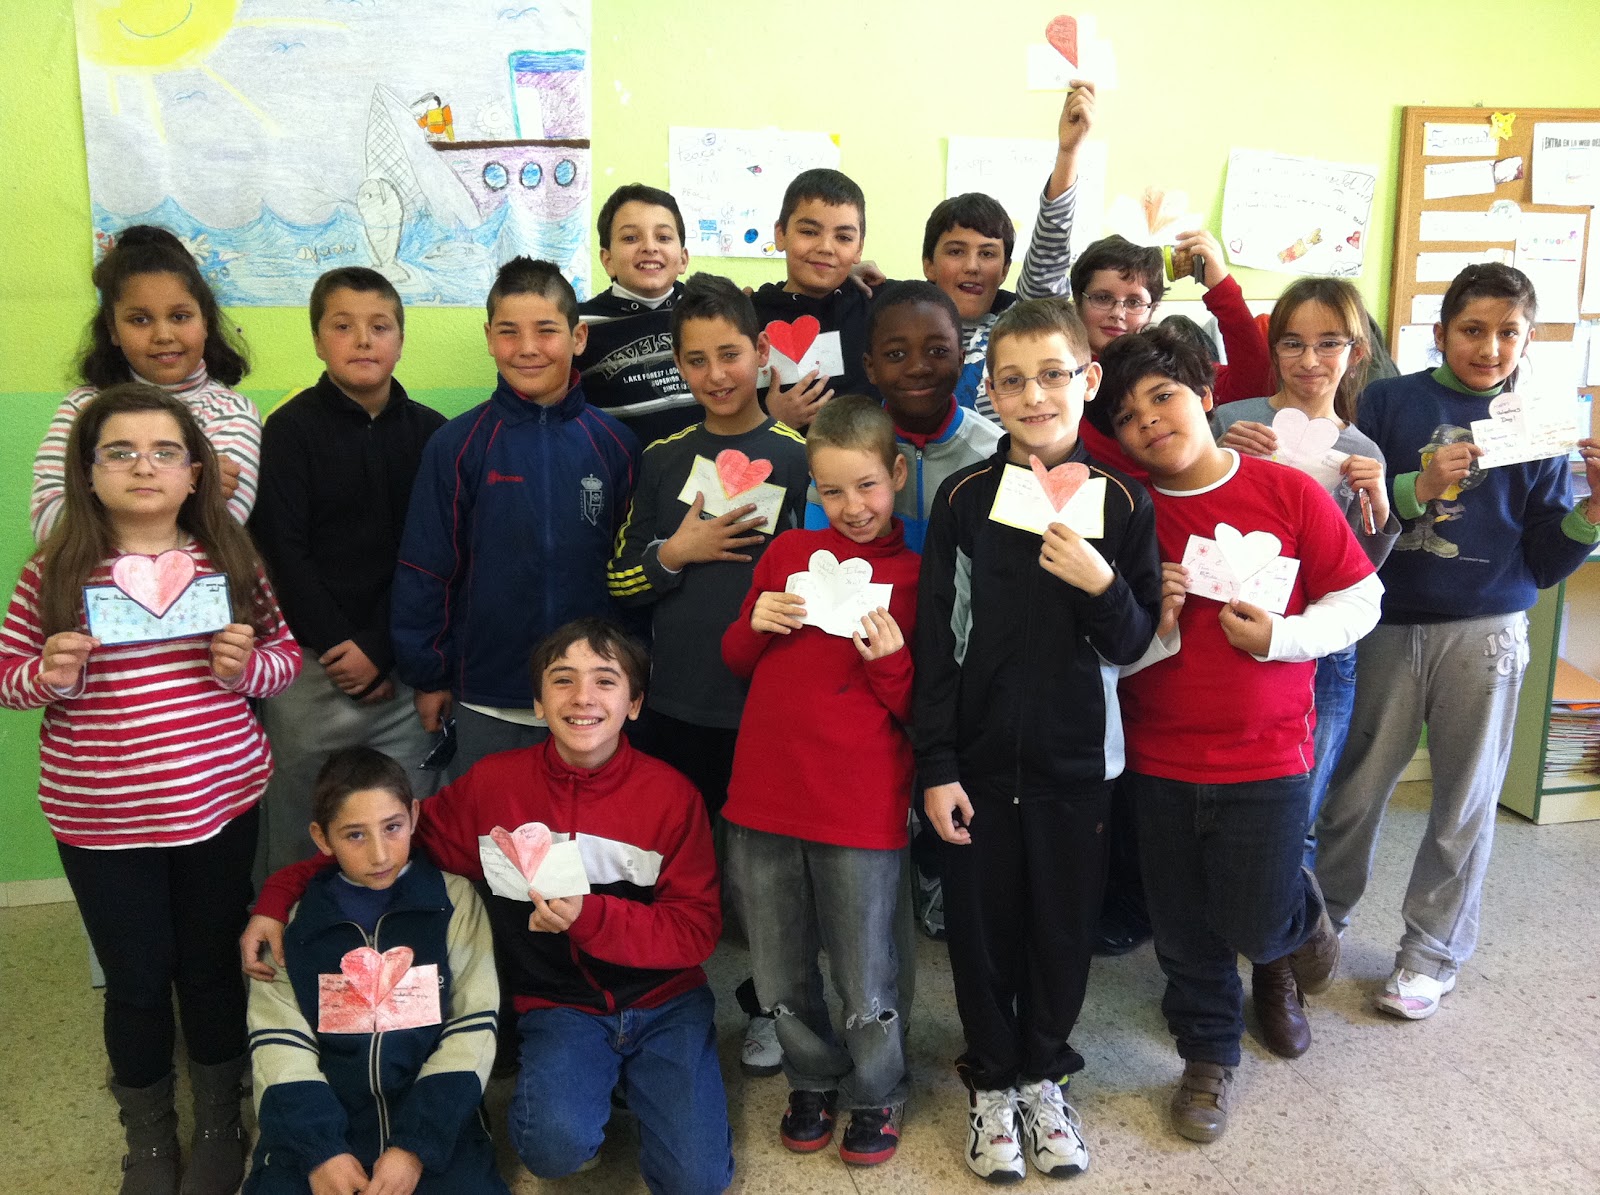 daniela-s-class-this-was-valentine-s-day-at-school